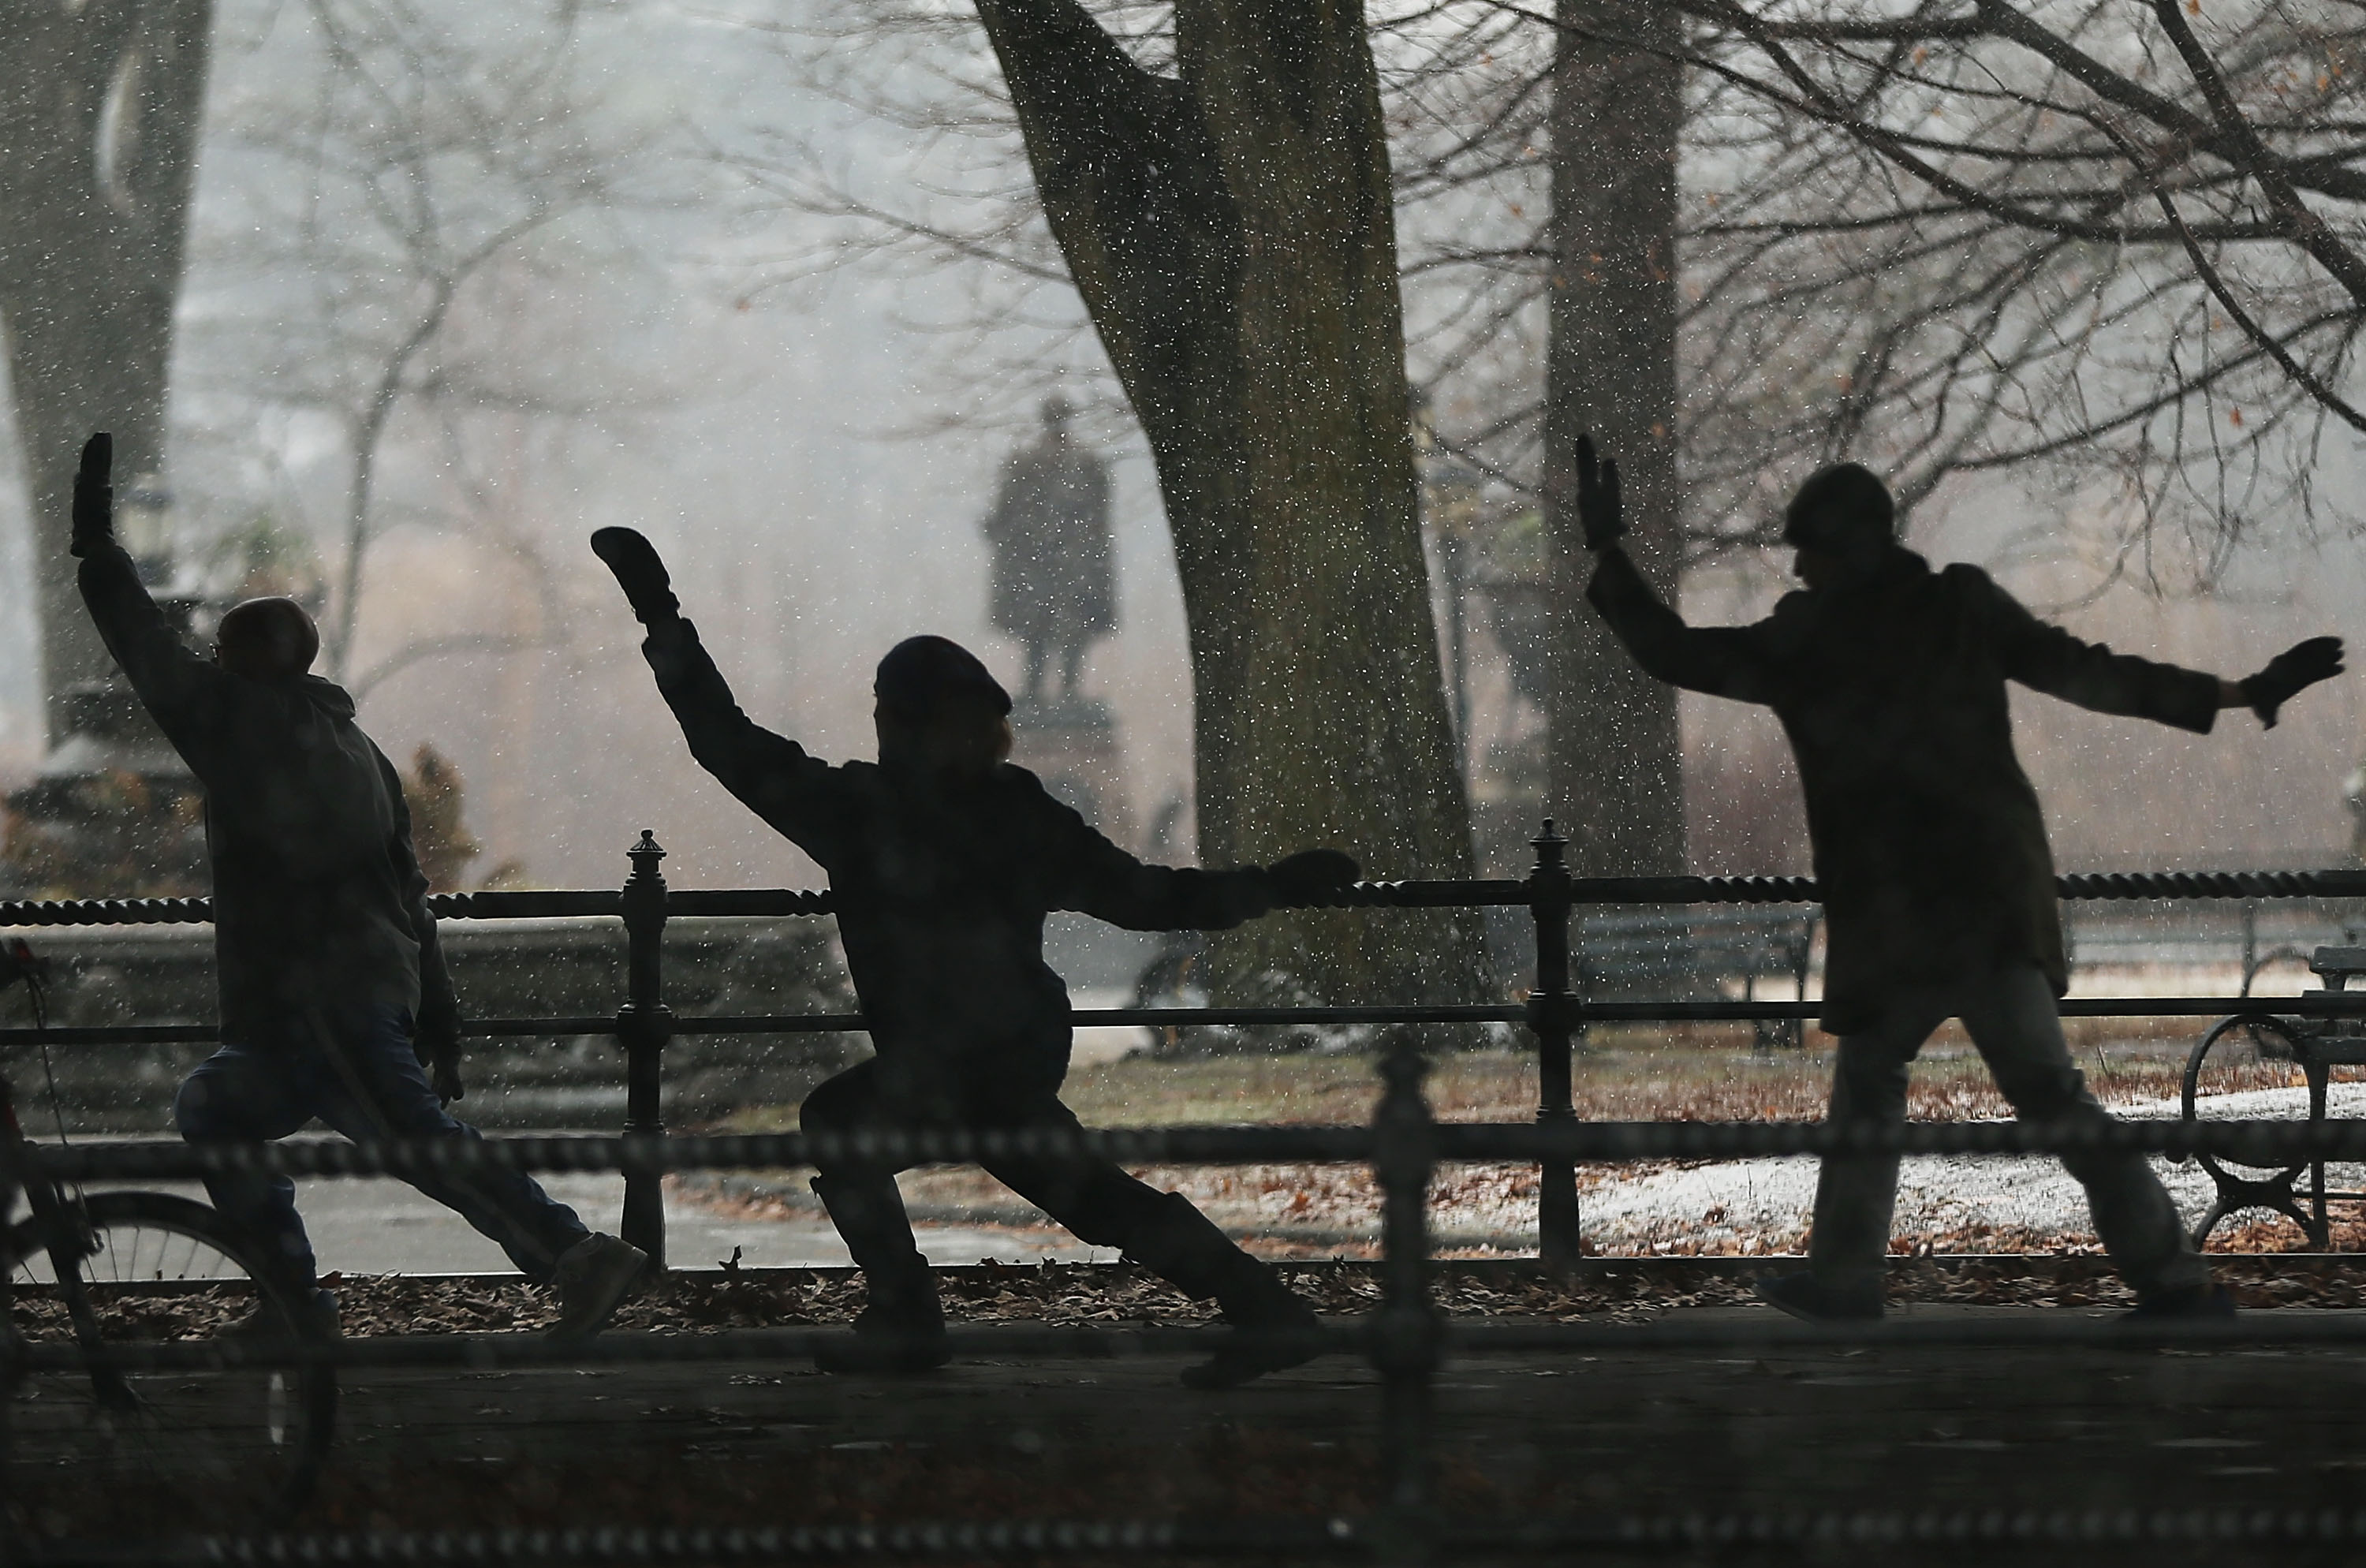 A group practicing Tai Chi on a cold day in a New York City park.